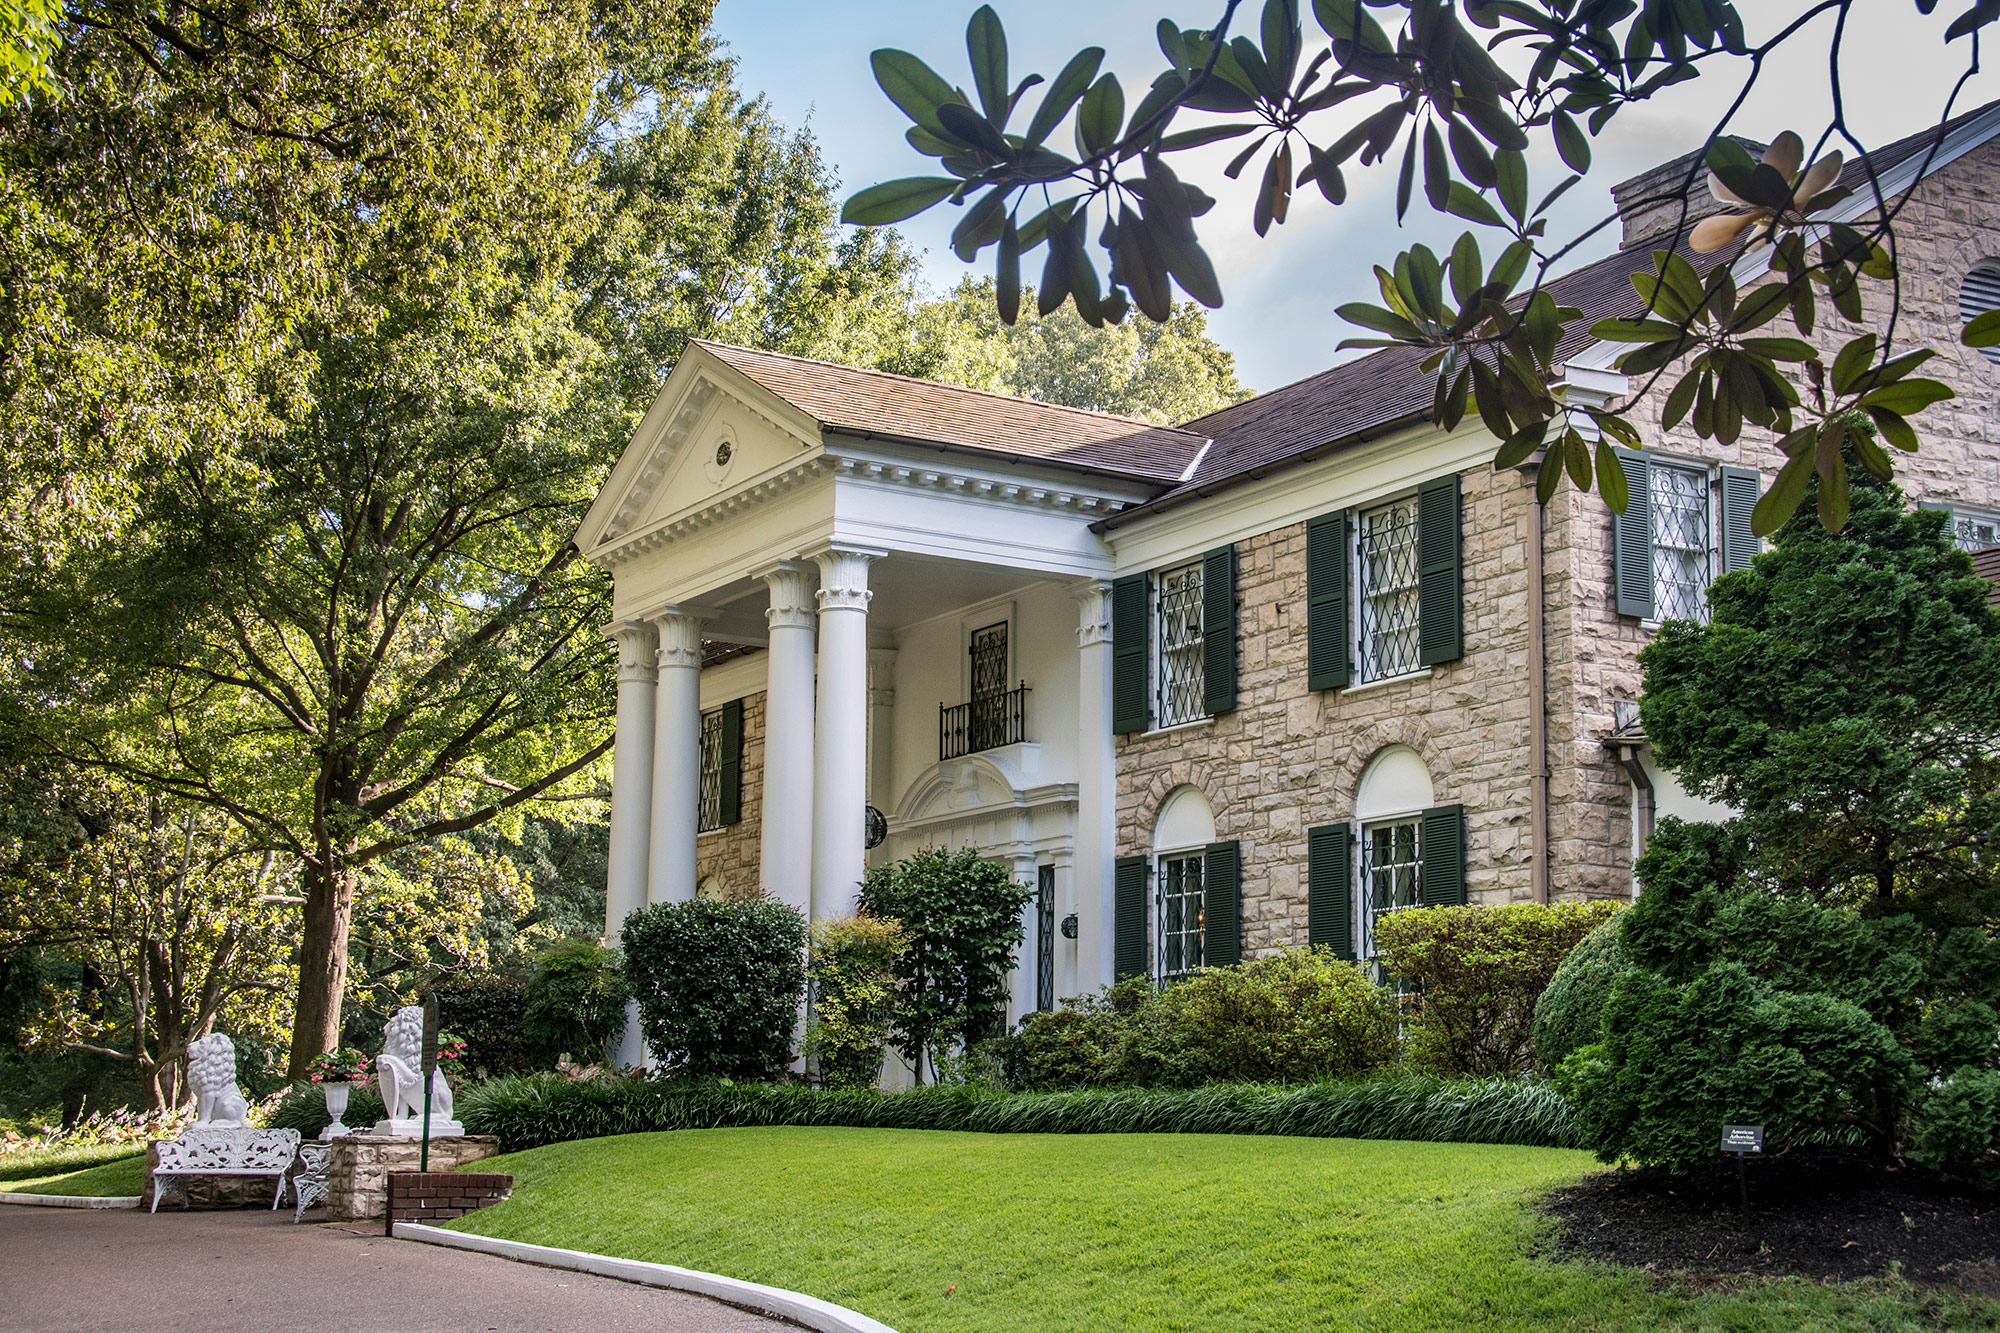 Graceland mansion in Memphis, Tennessee.